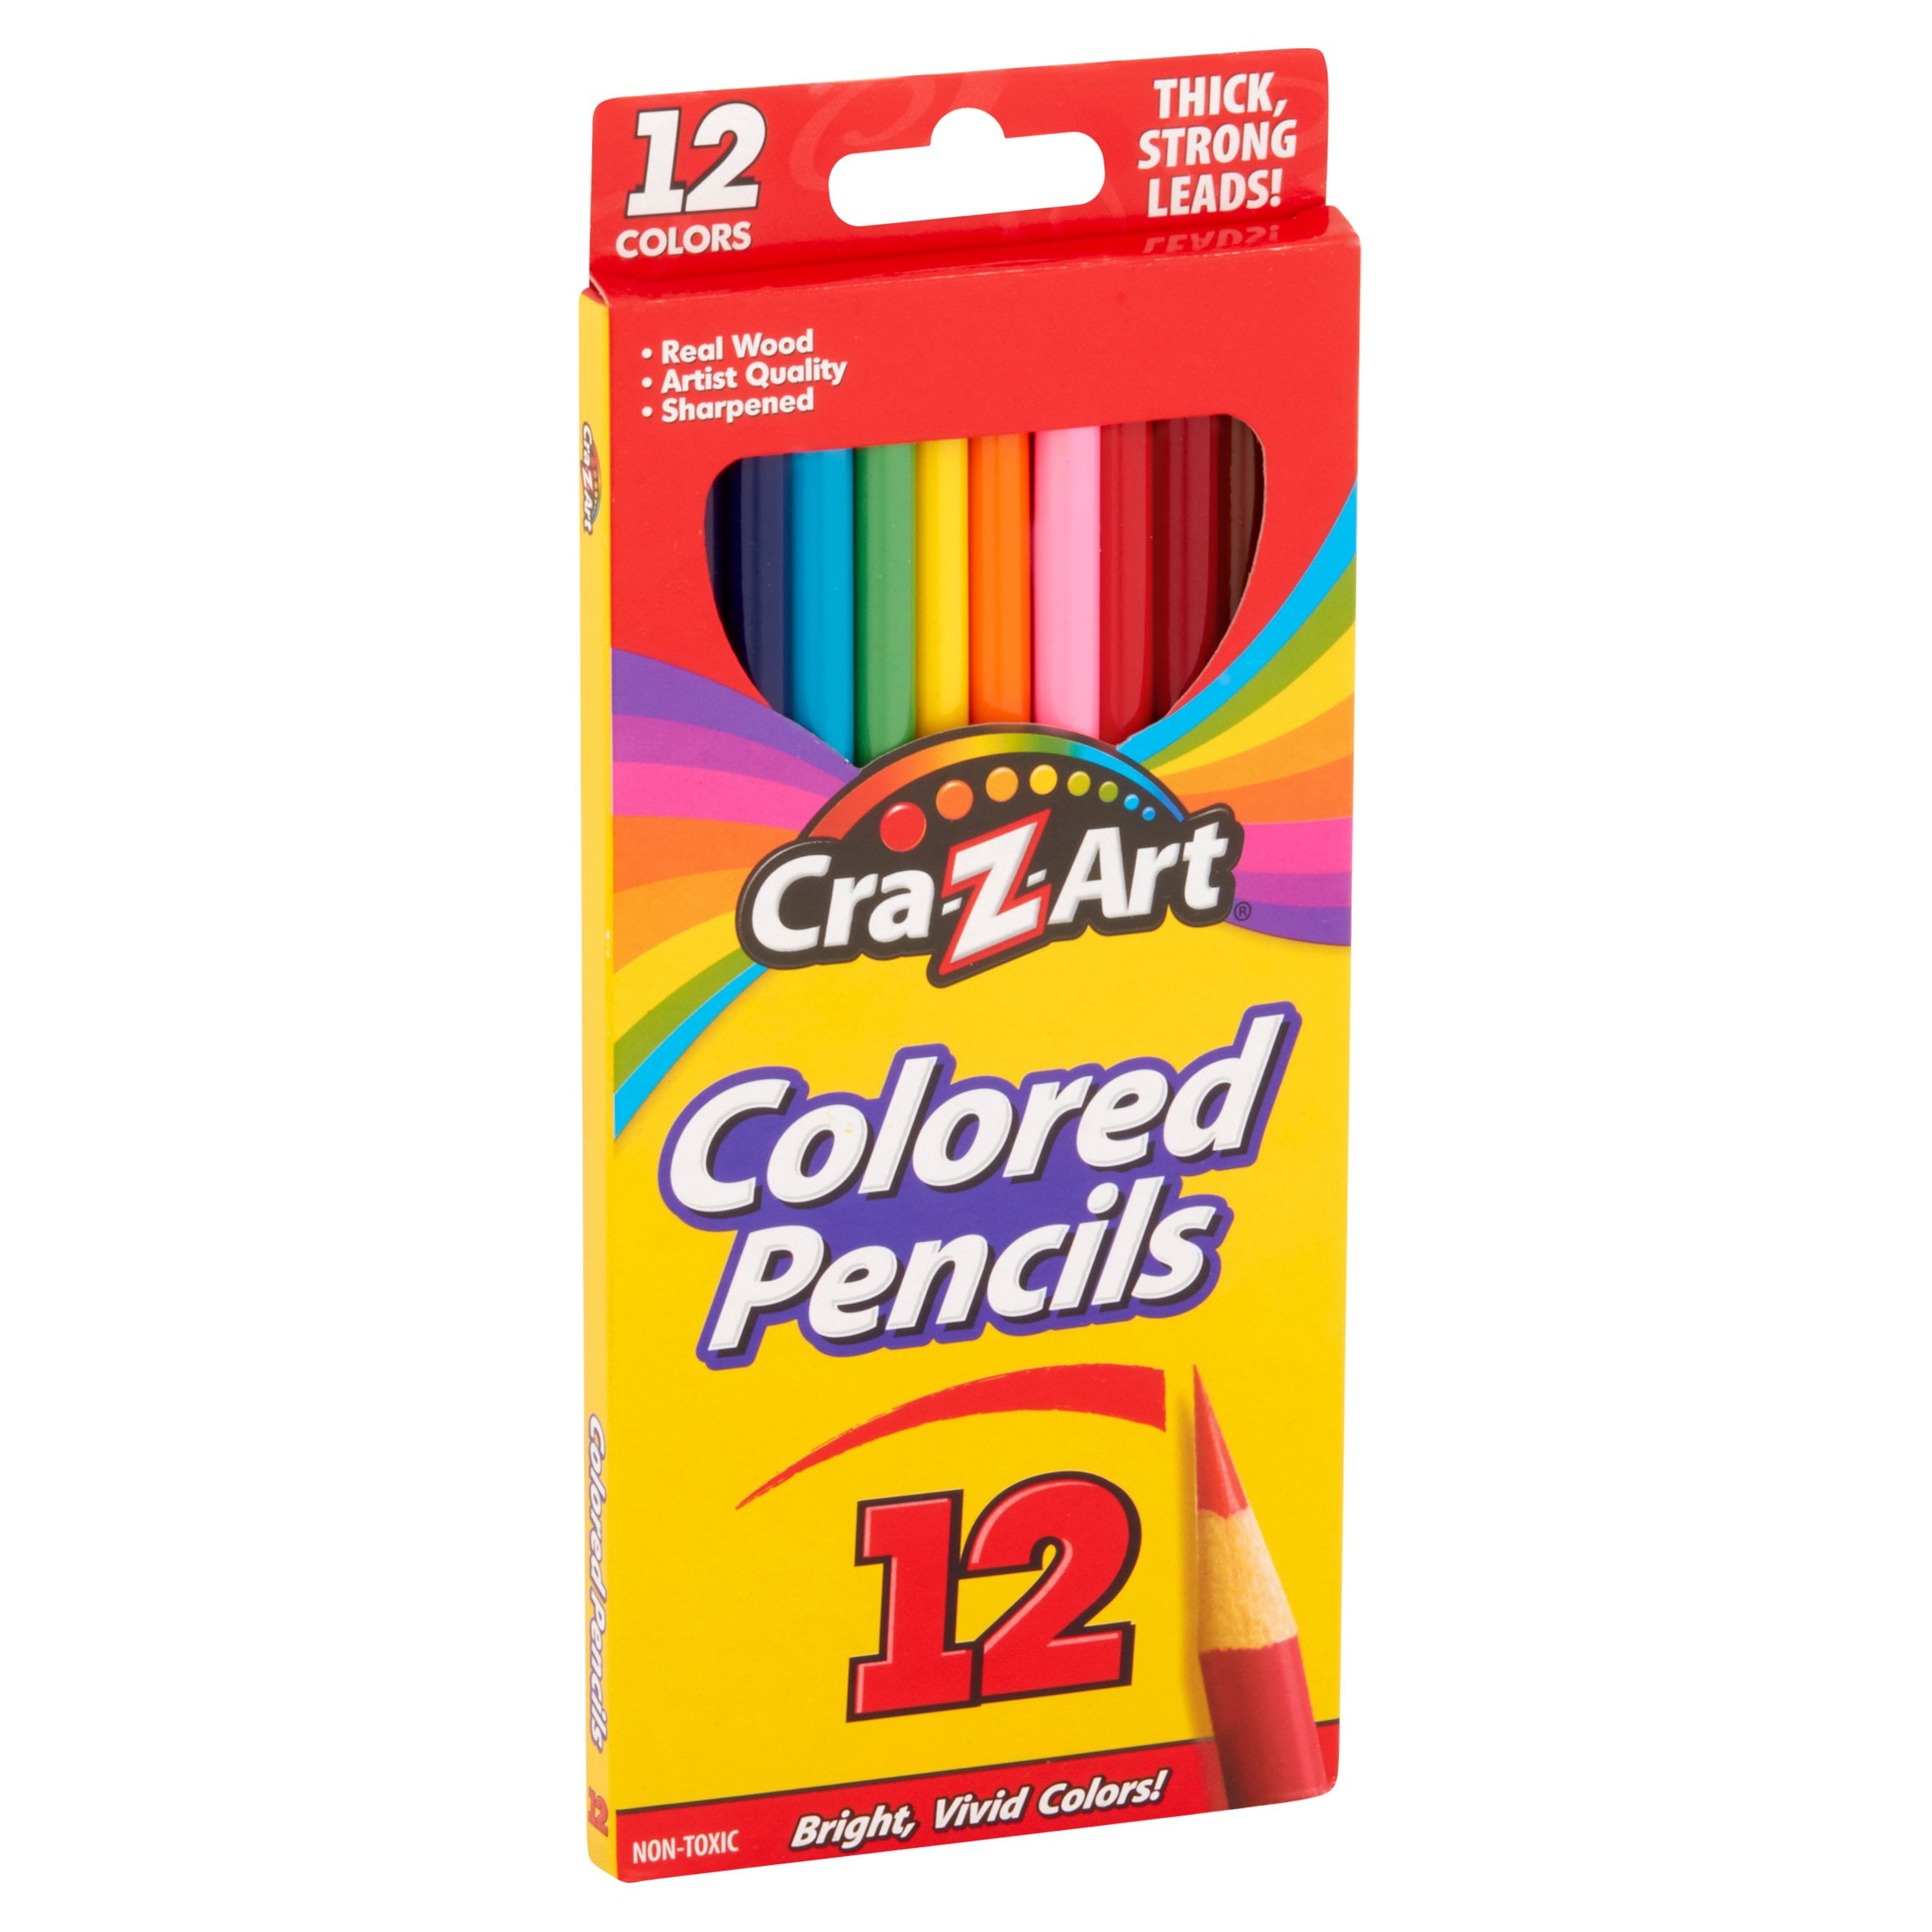 Walmart Alma - W Cherry St - Crayola Colors of the World Art Markers  contains 24 Colors specially formulated to represent people of the world.  These skin tone colored pencils make coloring